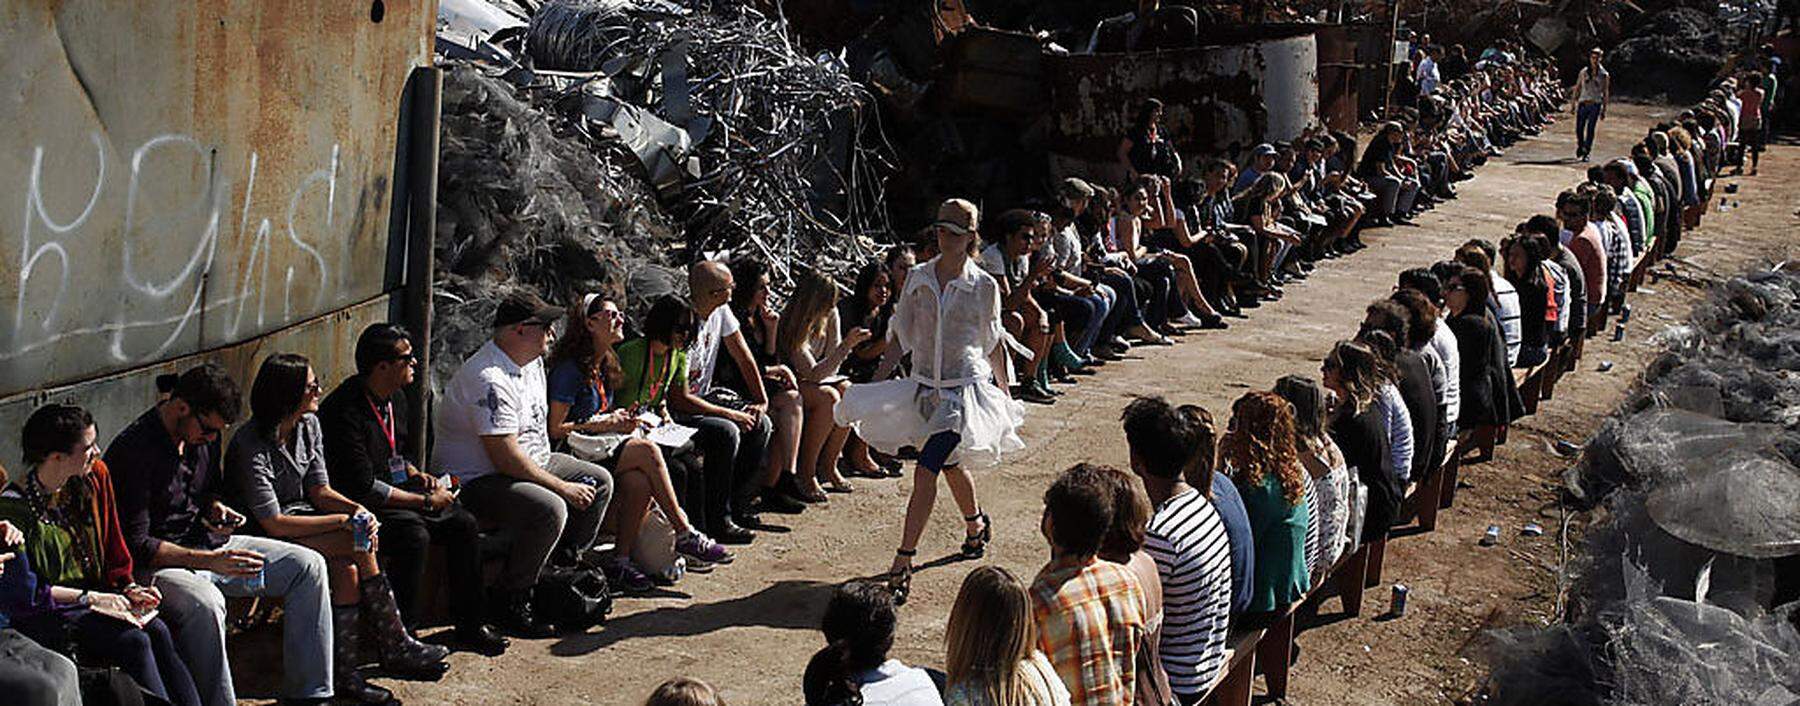 Model presents creation from Cavalera Summer 2012/2013 collection at a junkyard, during Sao Paulo Fashion Week